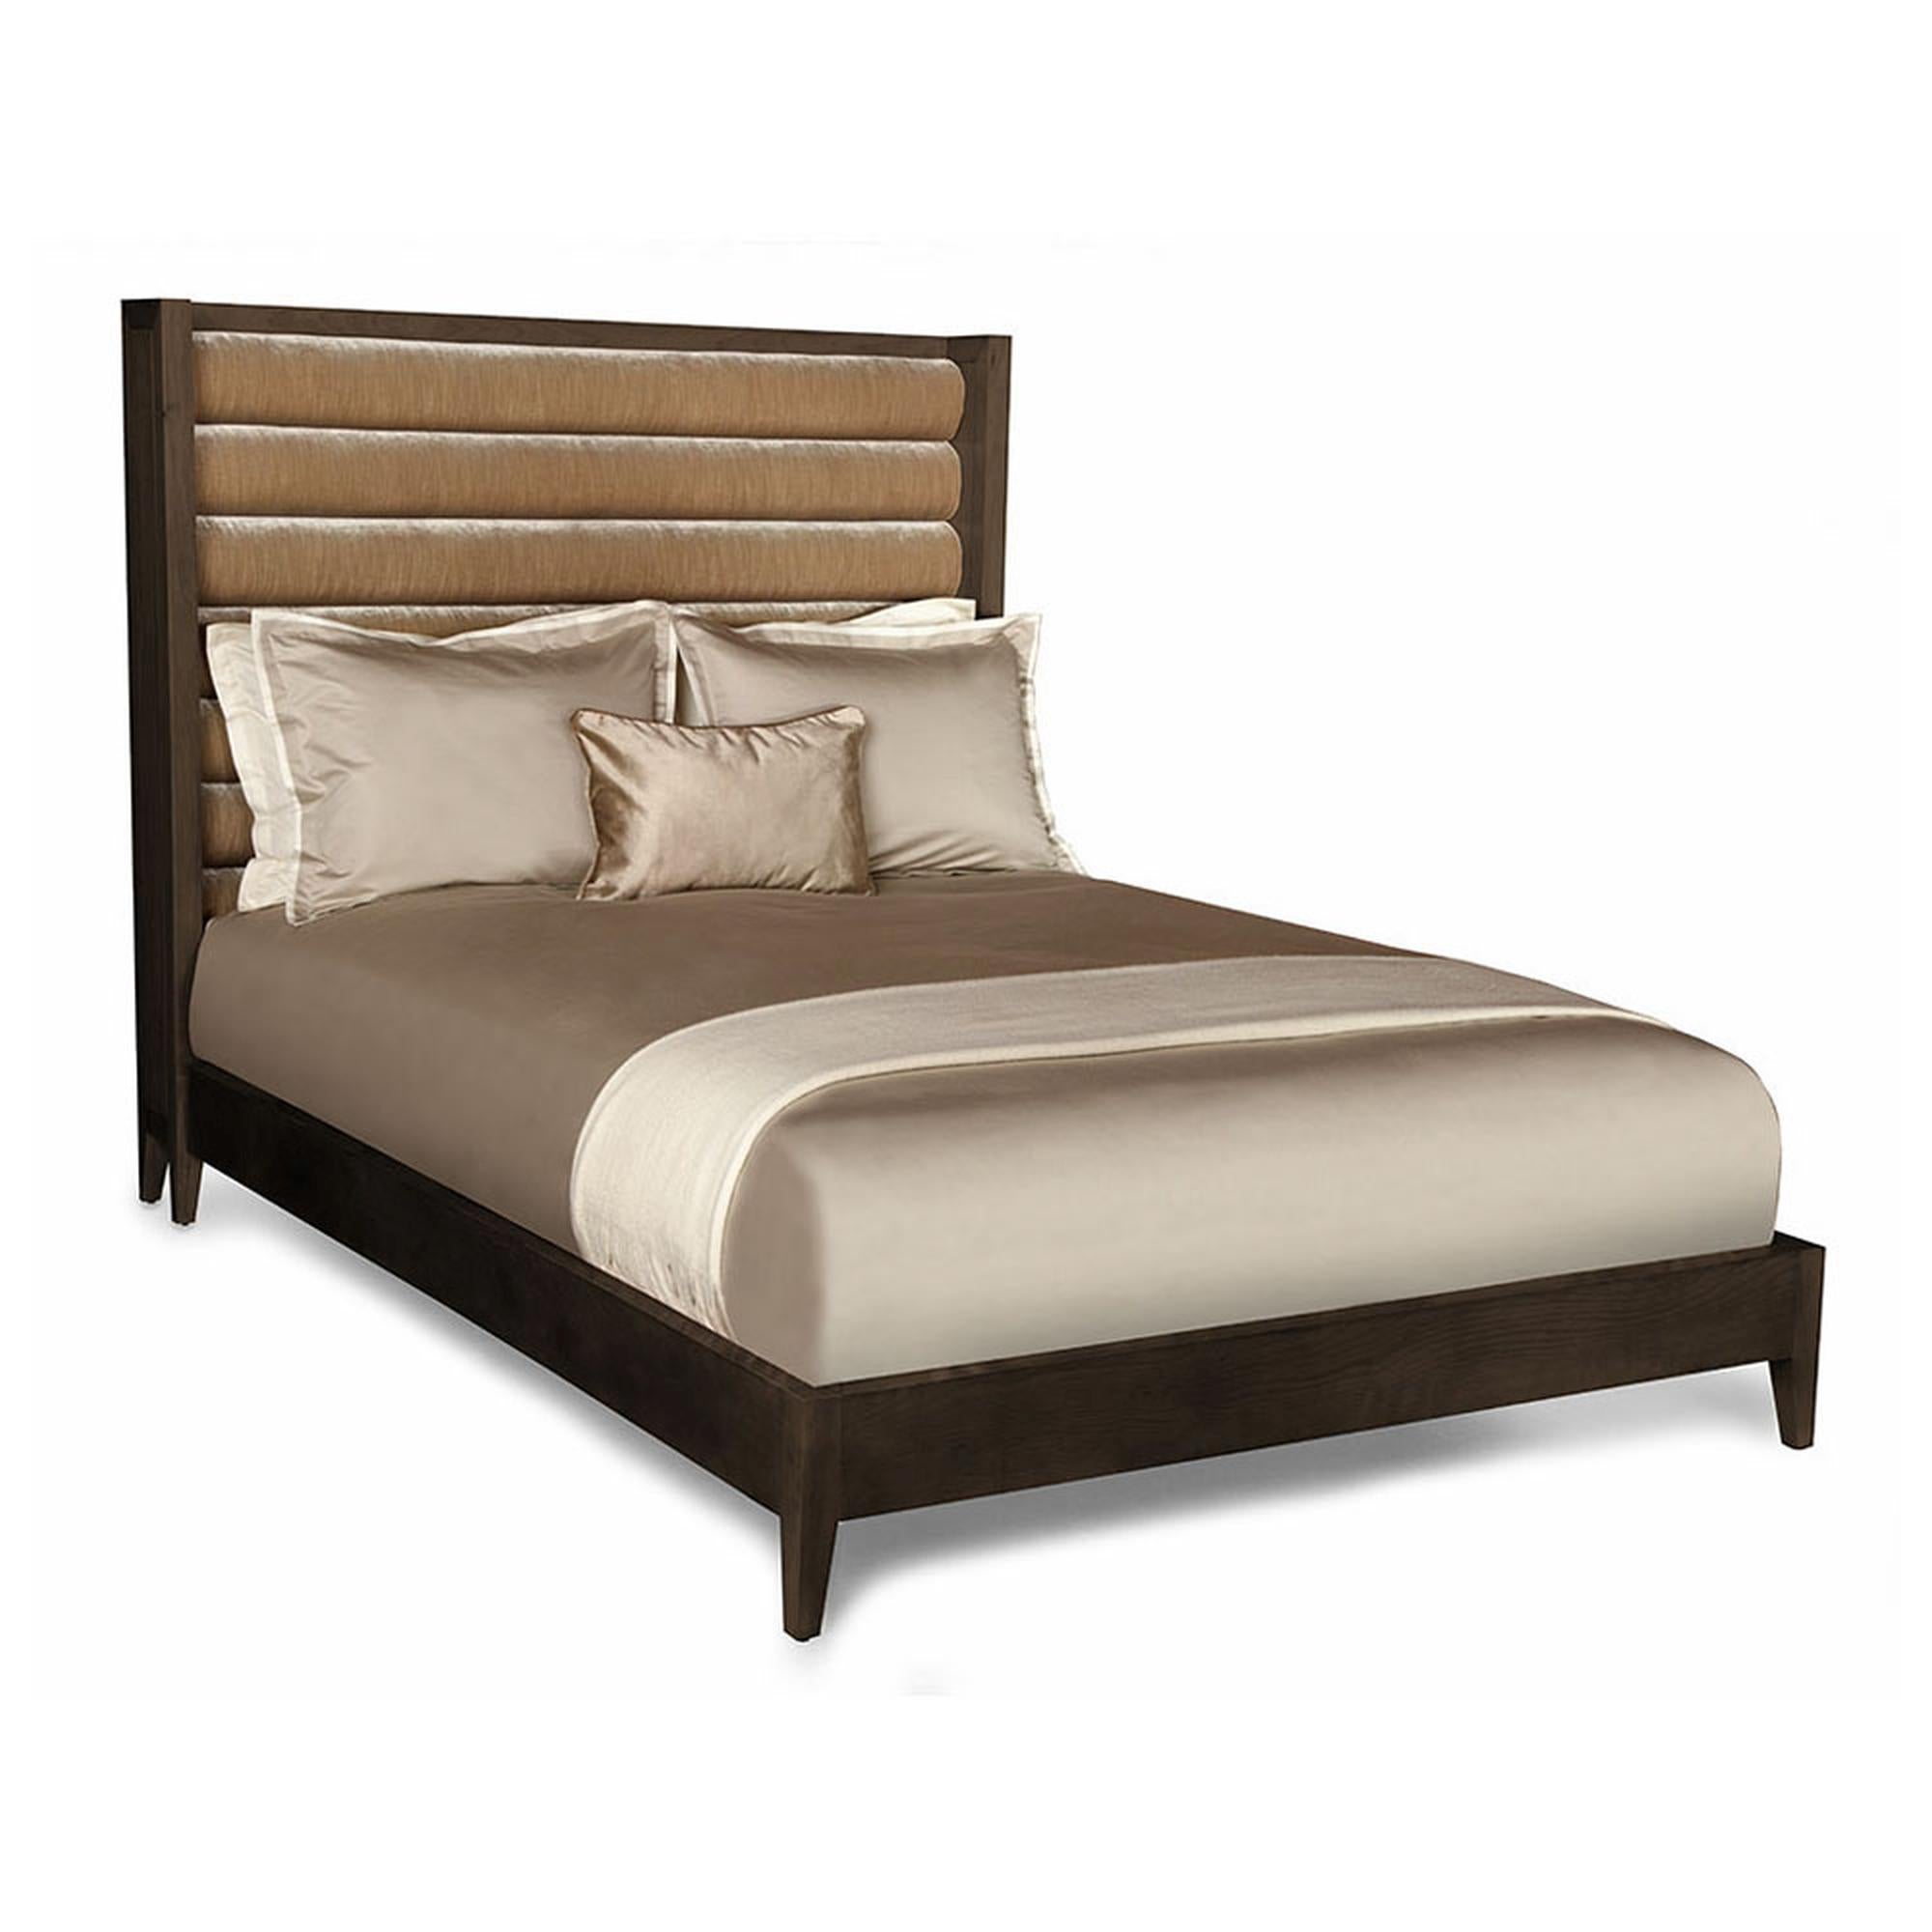 The Crawford bed is a stylish and chic bedroom mainstay. With its horizontal channel tufted headboard, tapered legs, and blush stained wood, this bed provides luxurious comfort while exuding sophistication, warmth, and elegance. The wood is sanded,